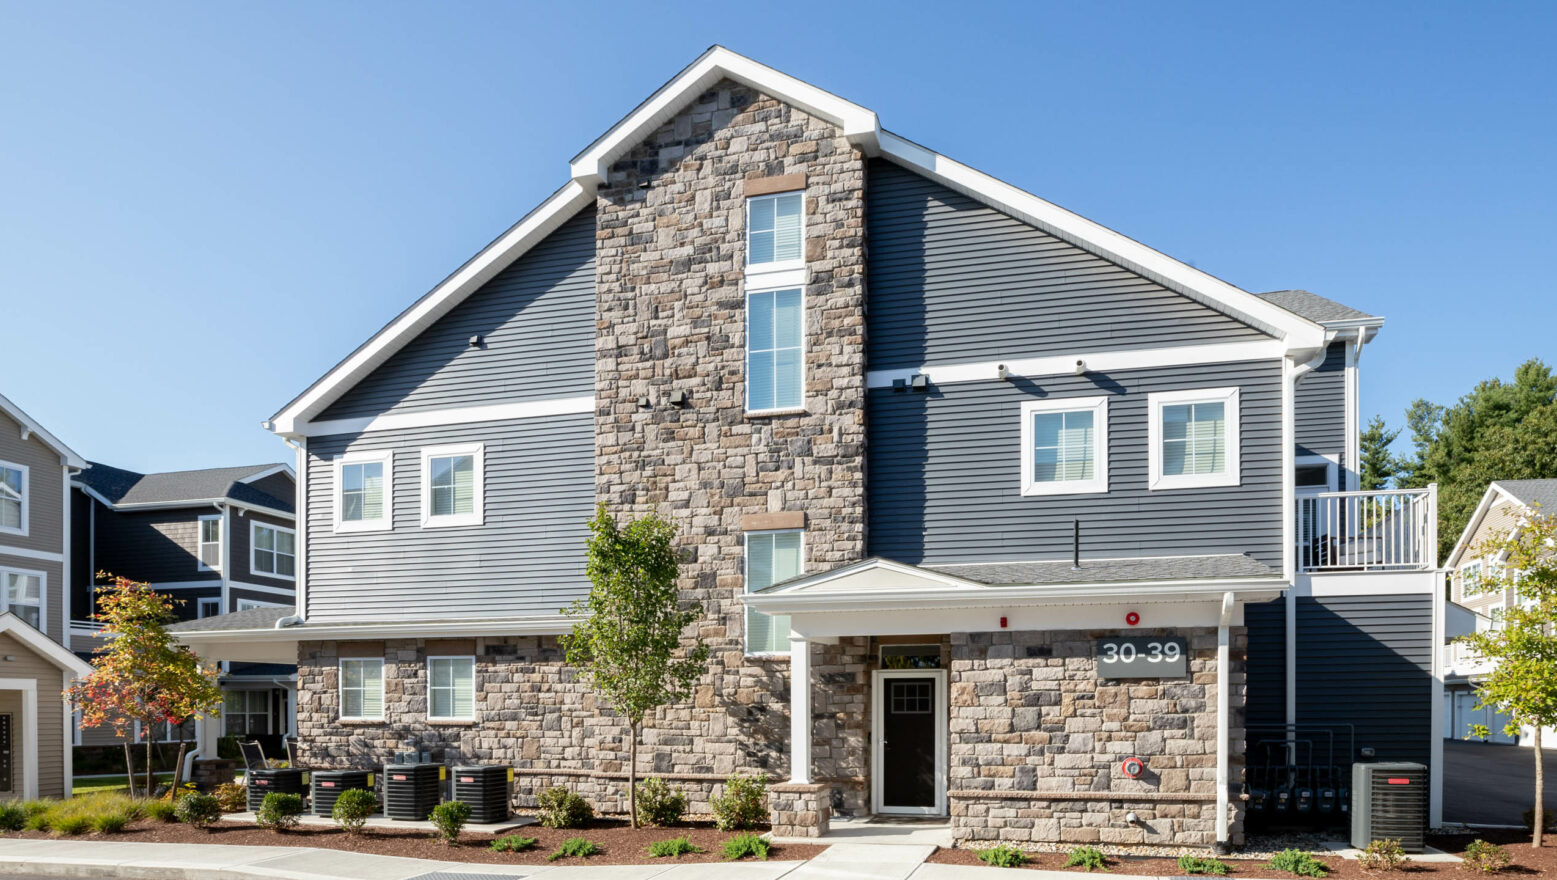 Commercial apartment building with stone veneer work completed by Dex by Terra in Massachusetts.